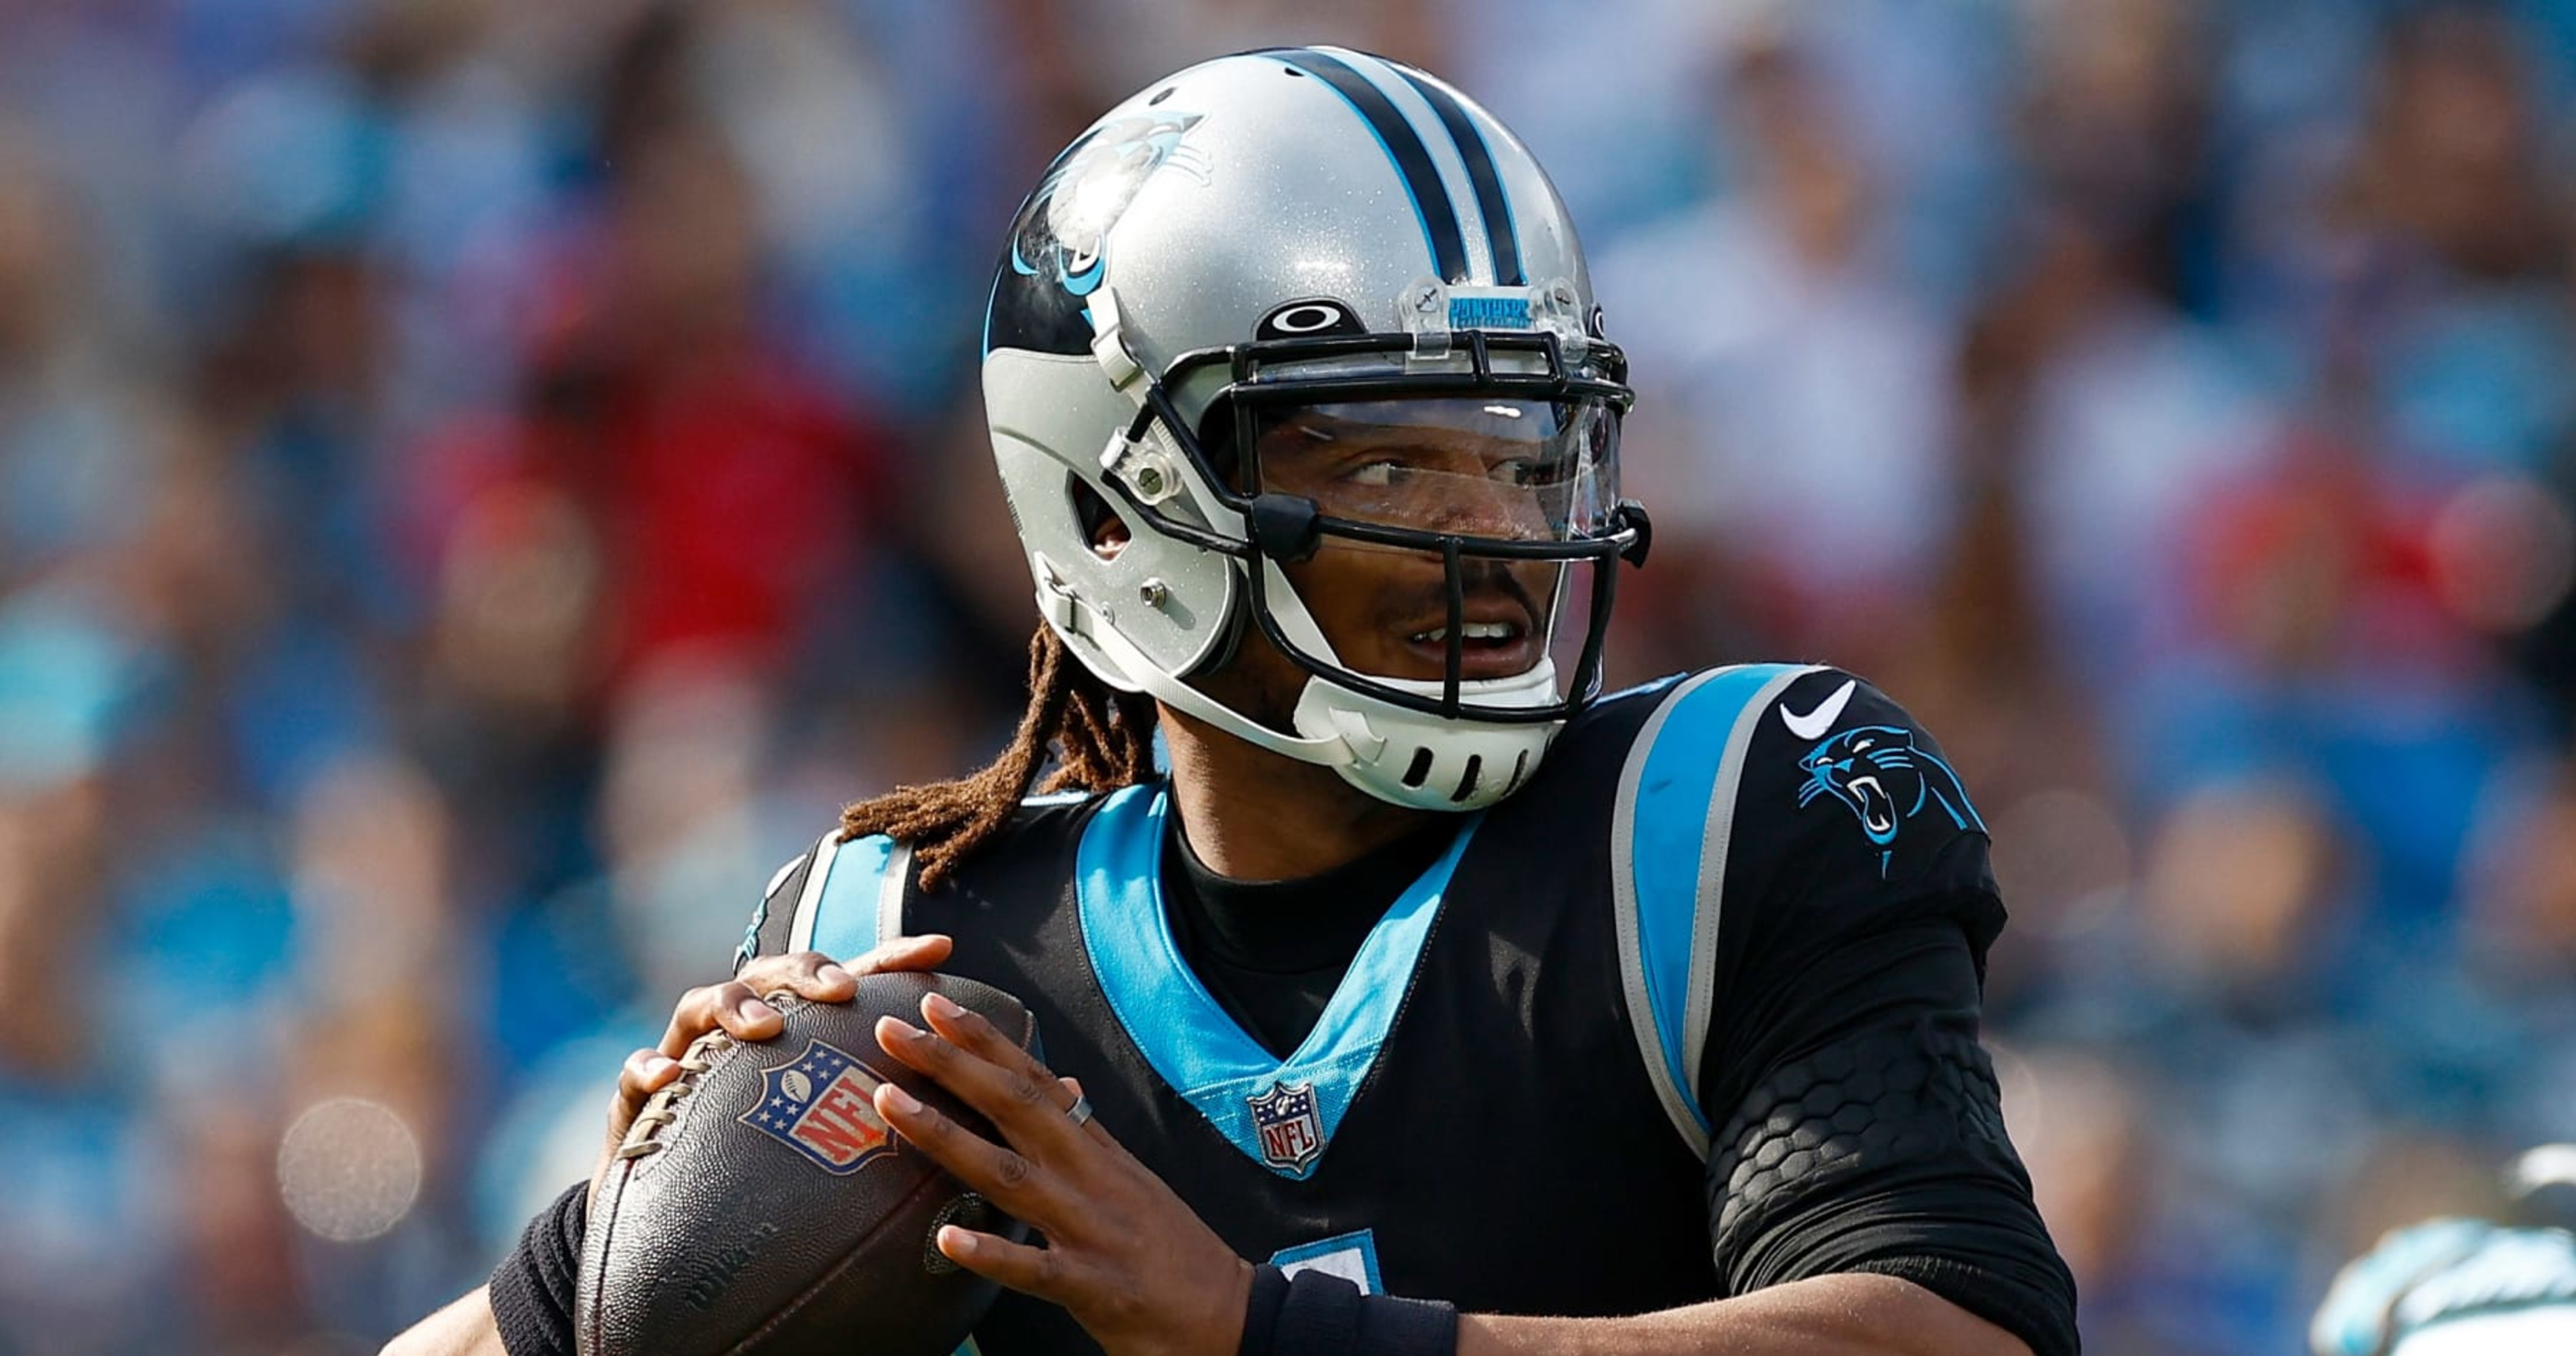 Video: Cam Newton Says He's Not Retiring, But Doesn't Expect Another NFL Contract